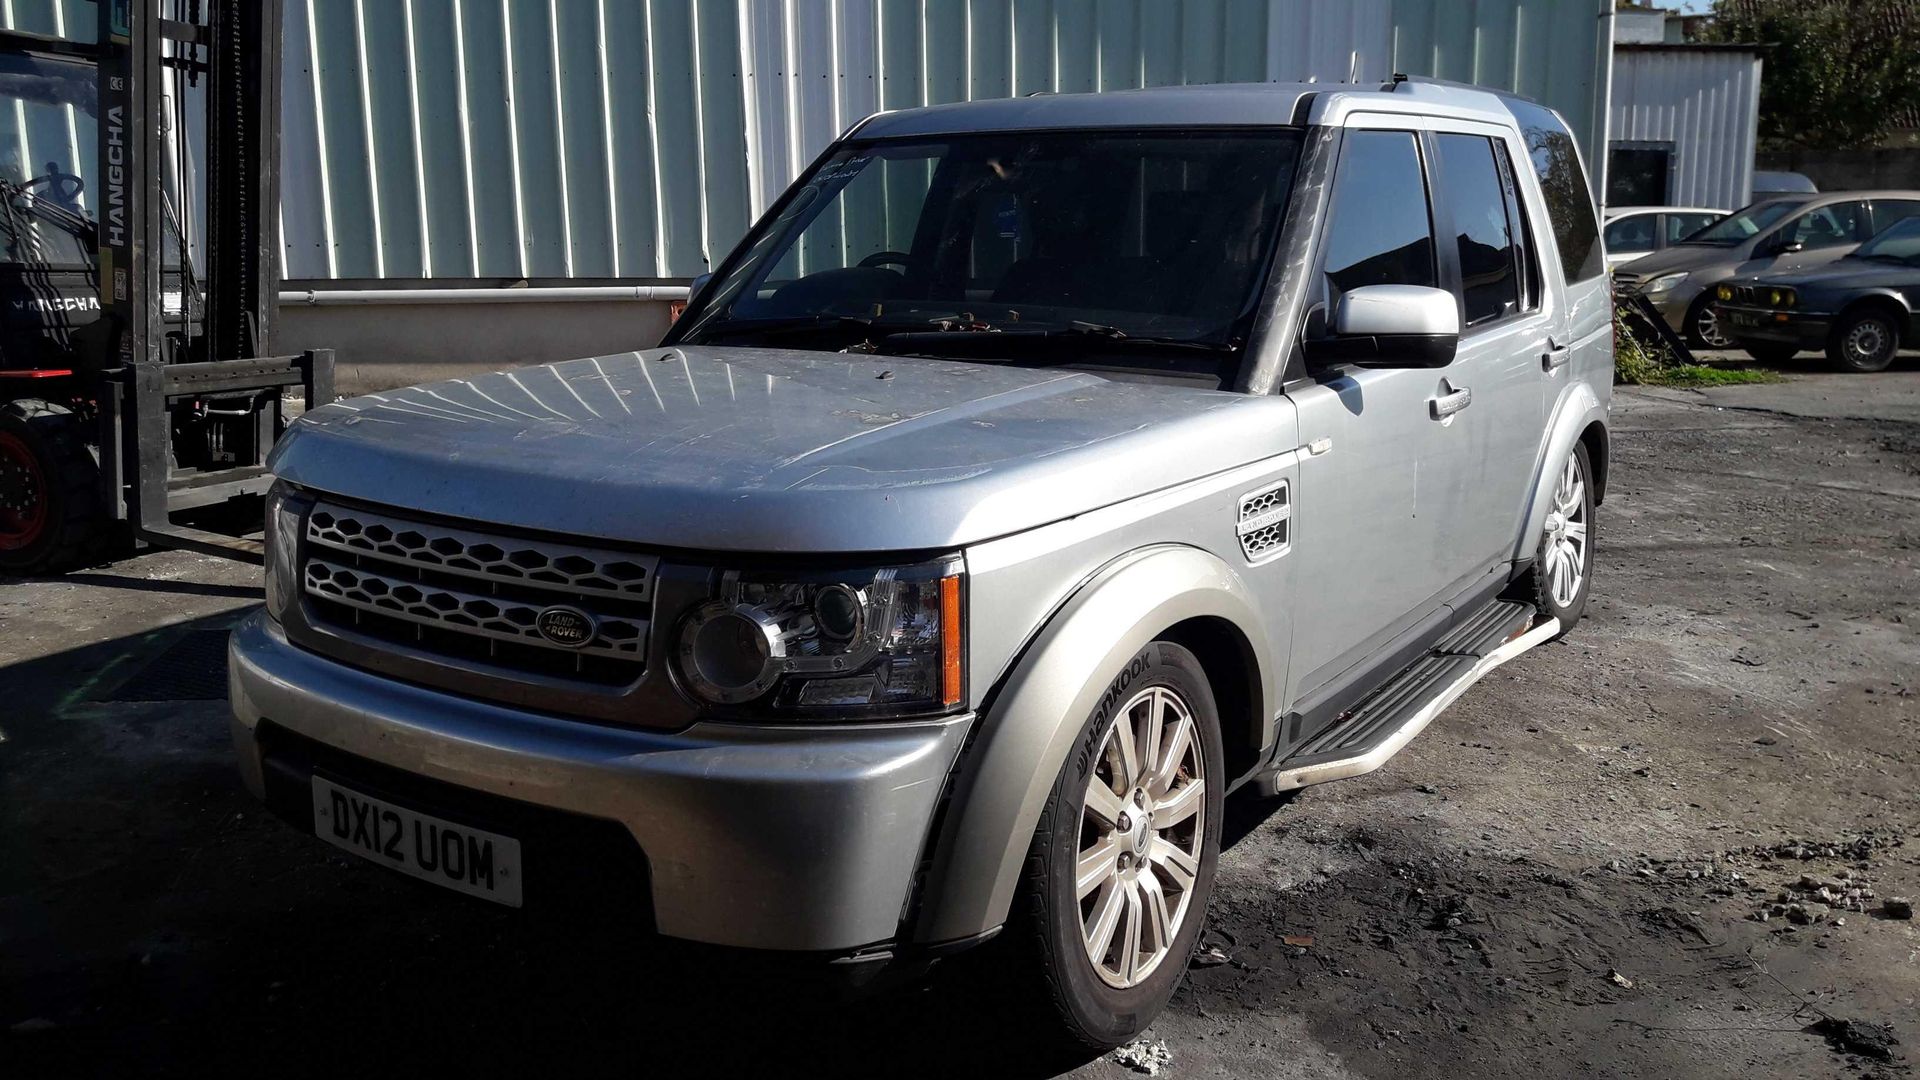 Null [RP][ACI] LAND ROVER Discovery, Diesel, imm. DXI2UOM (England), Type unknow&hellip;